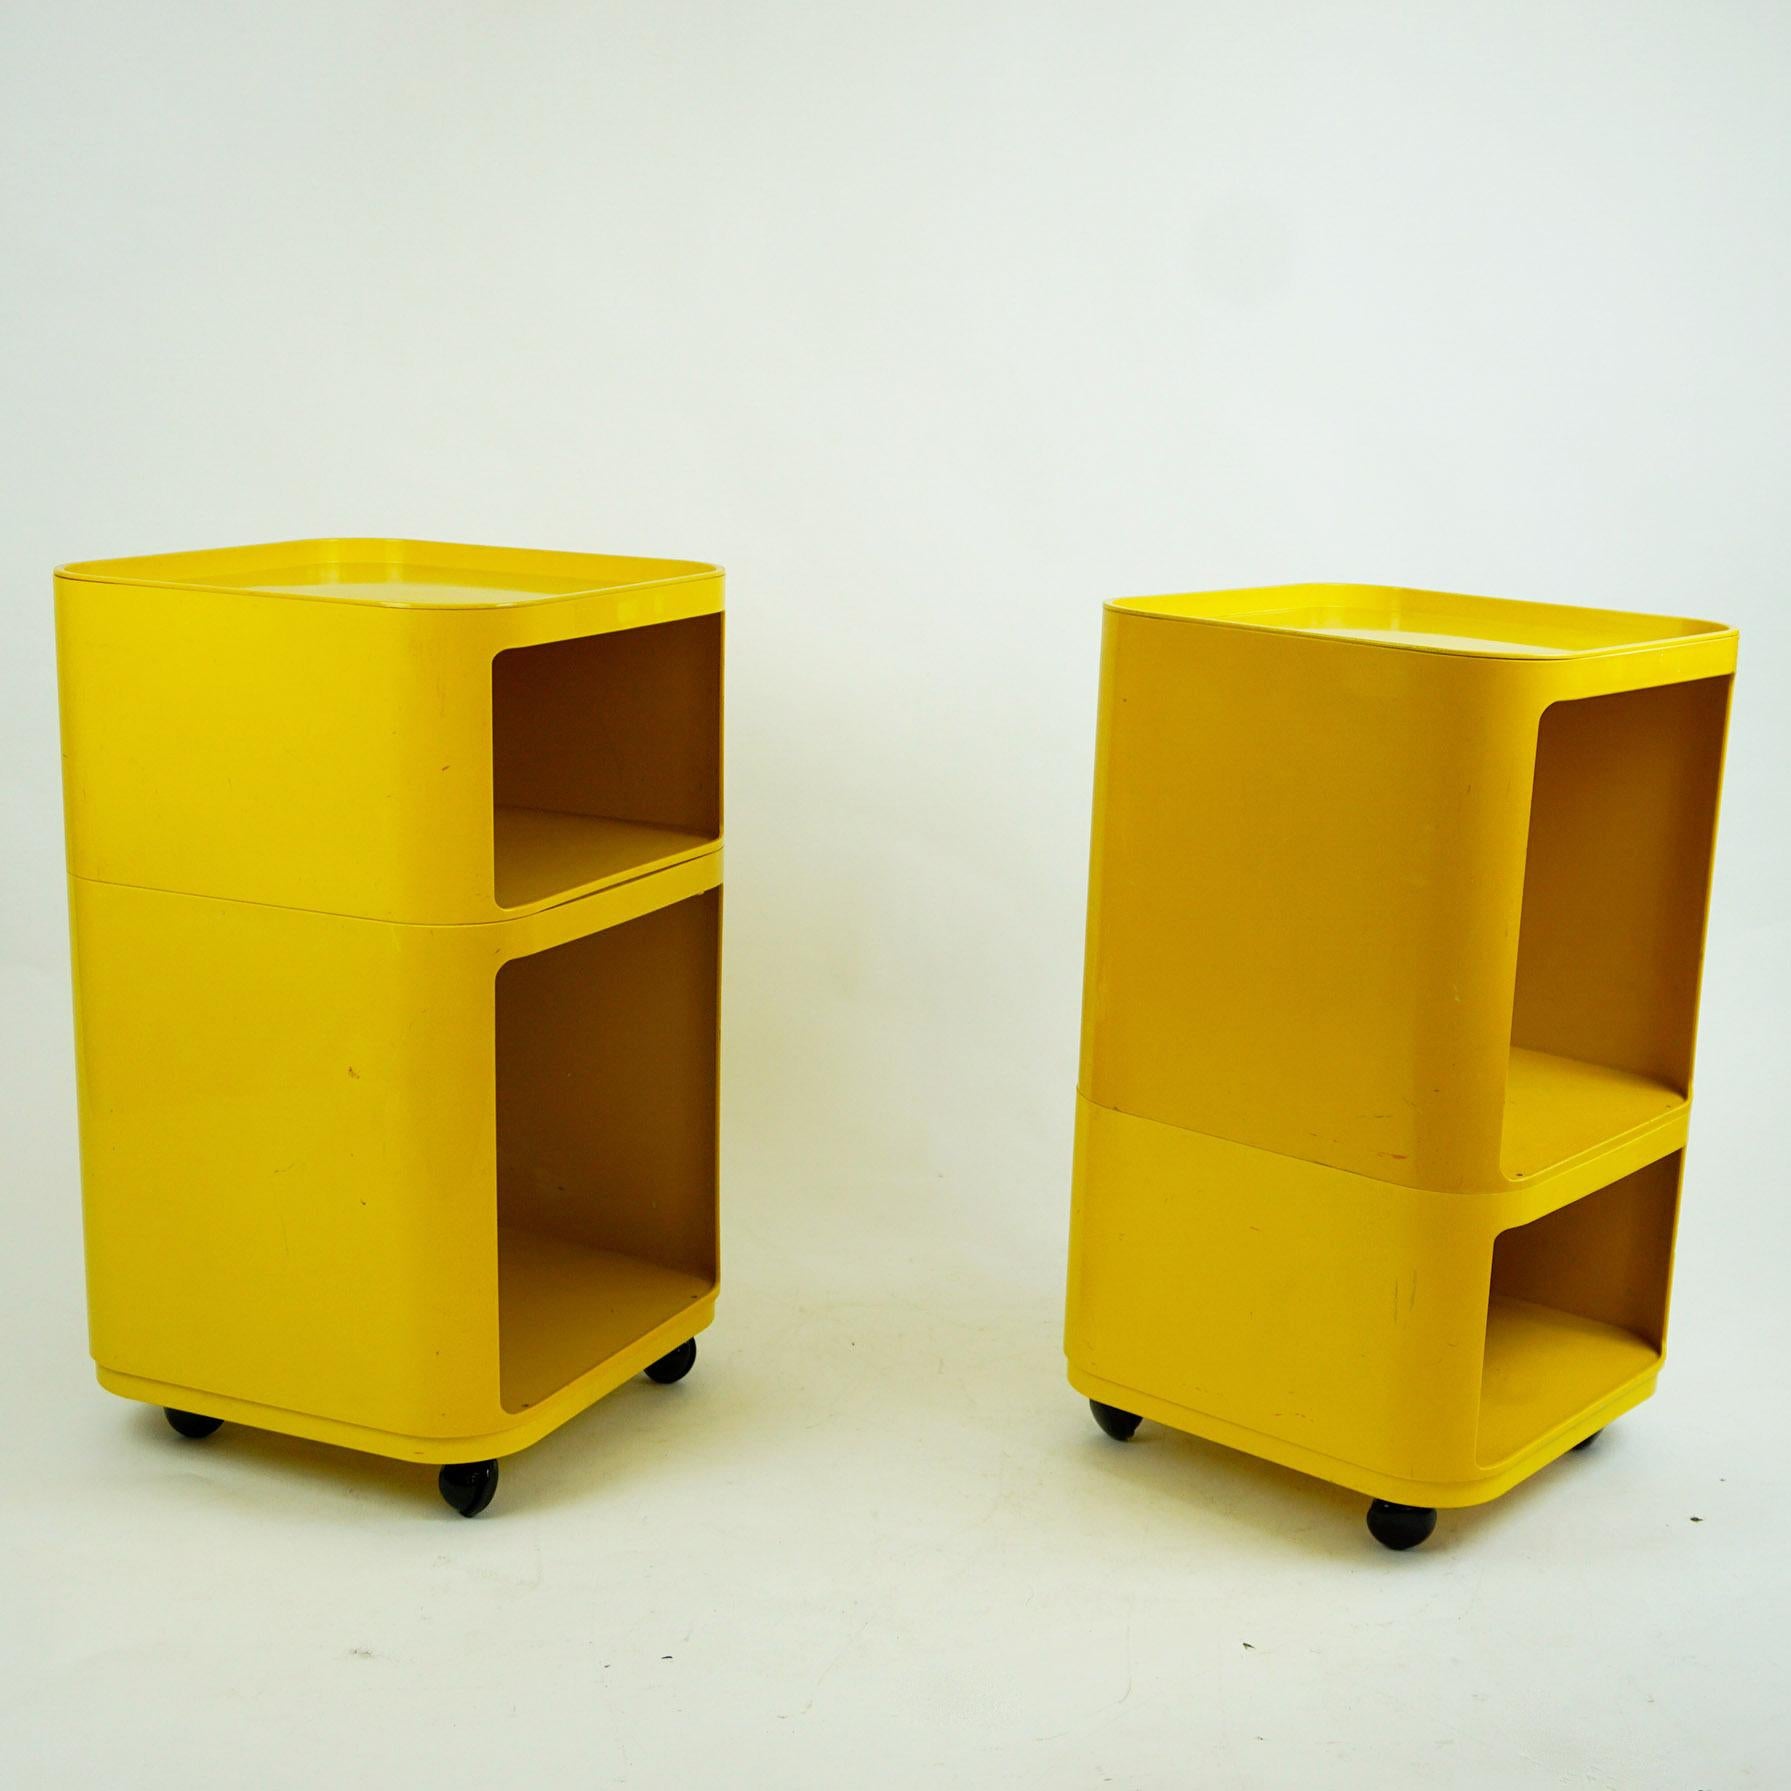 Iconic plastic bar trolleys or bar carts Componibili designed by Anna Castelli for Kartell Italy in the 1970s. They feature four dismountable parts which can be arranged in different ways. Rare in this bright yellow color, the four wheels have been